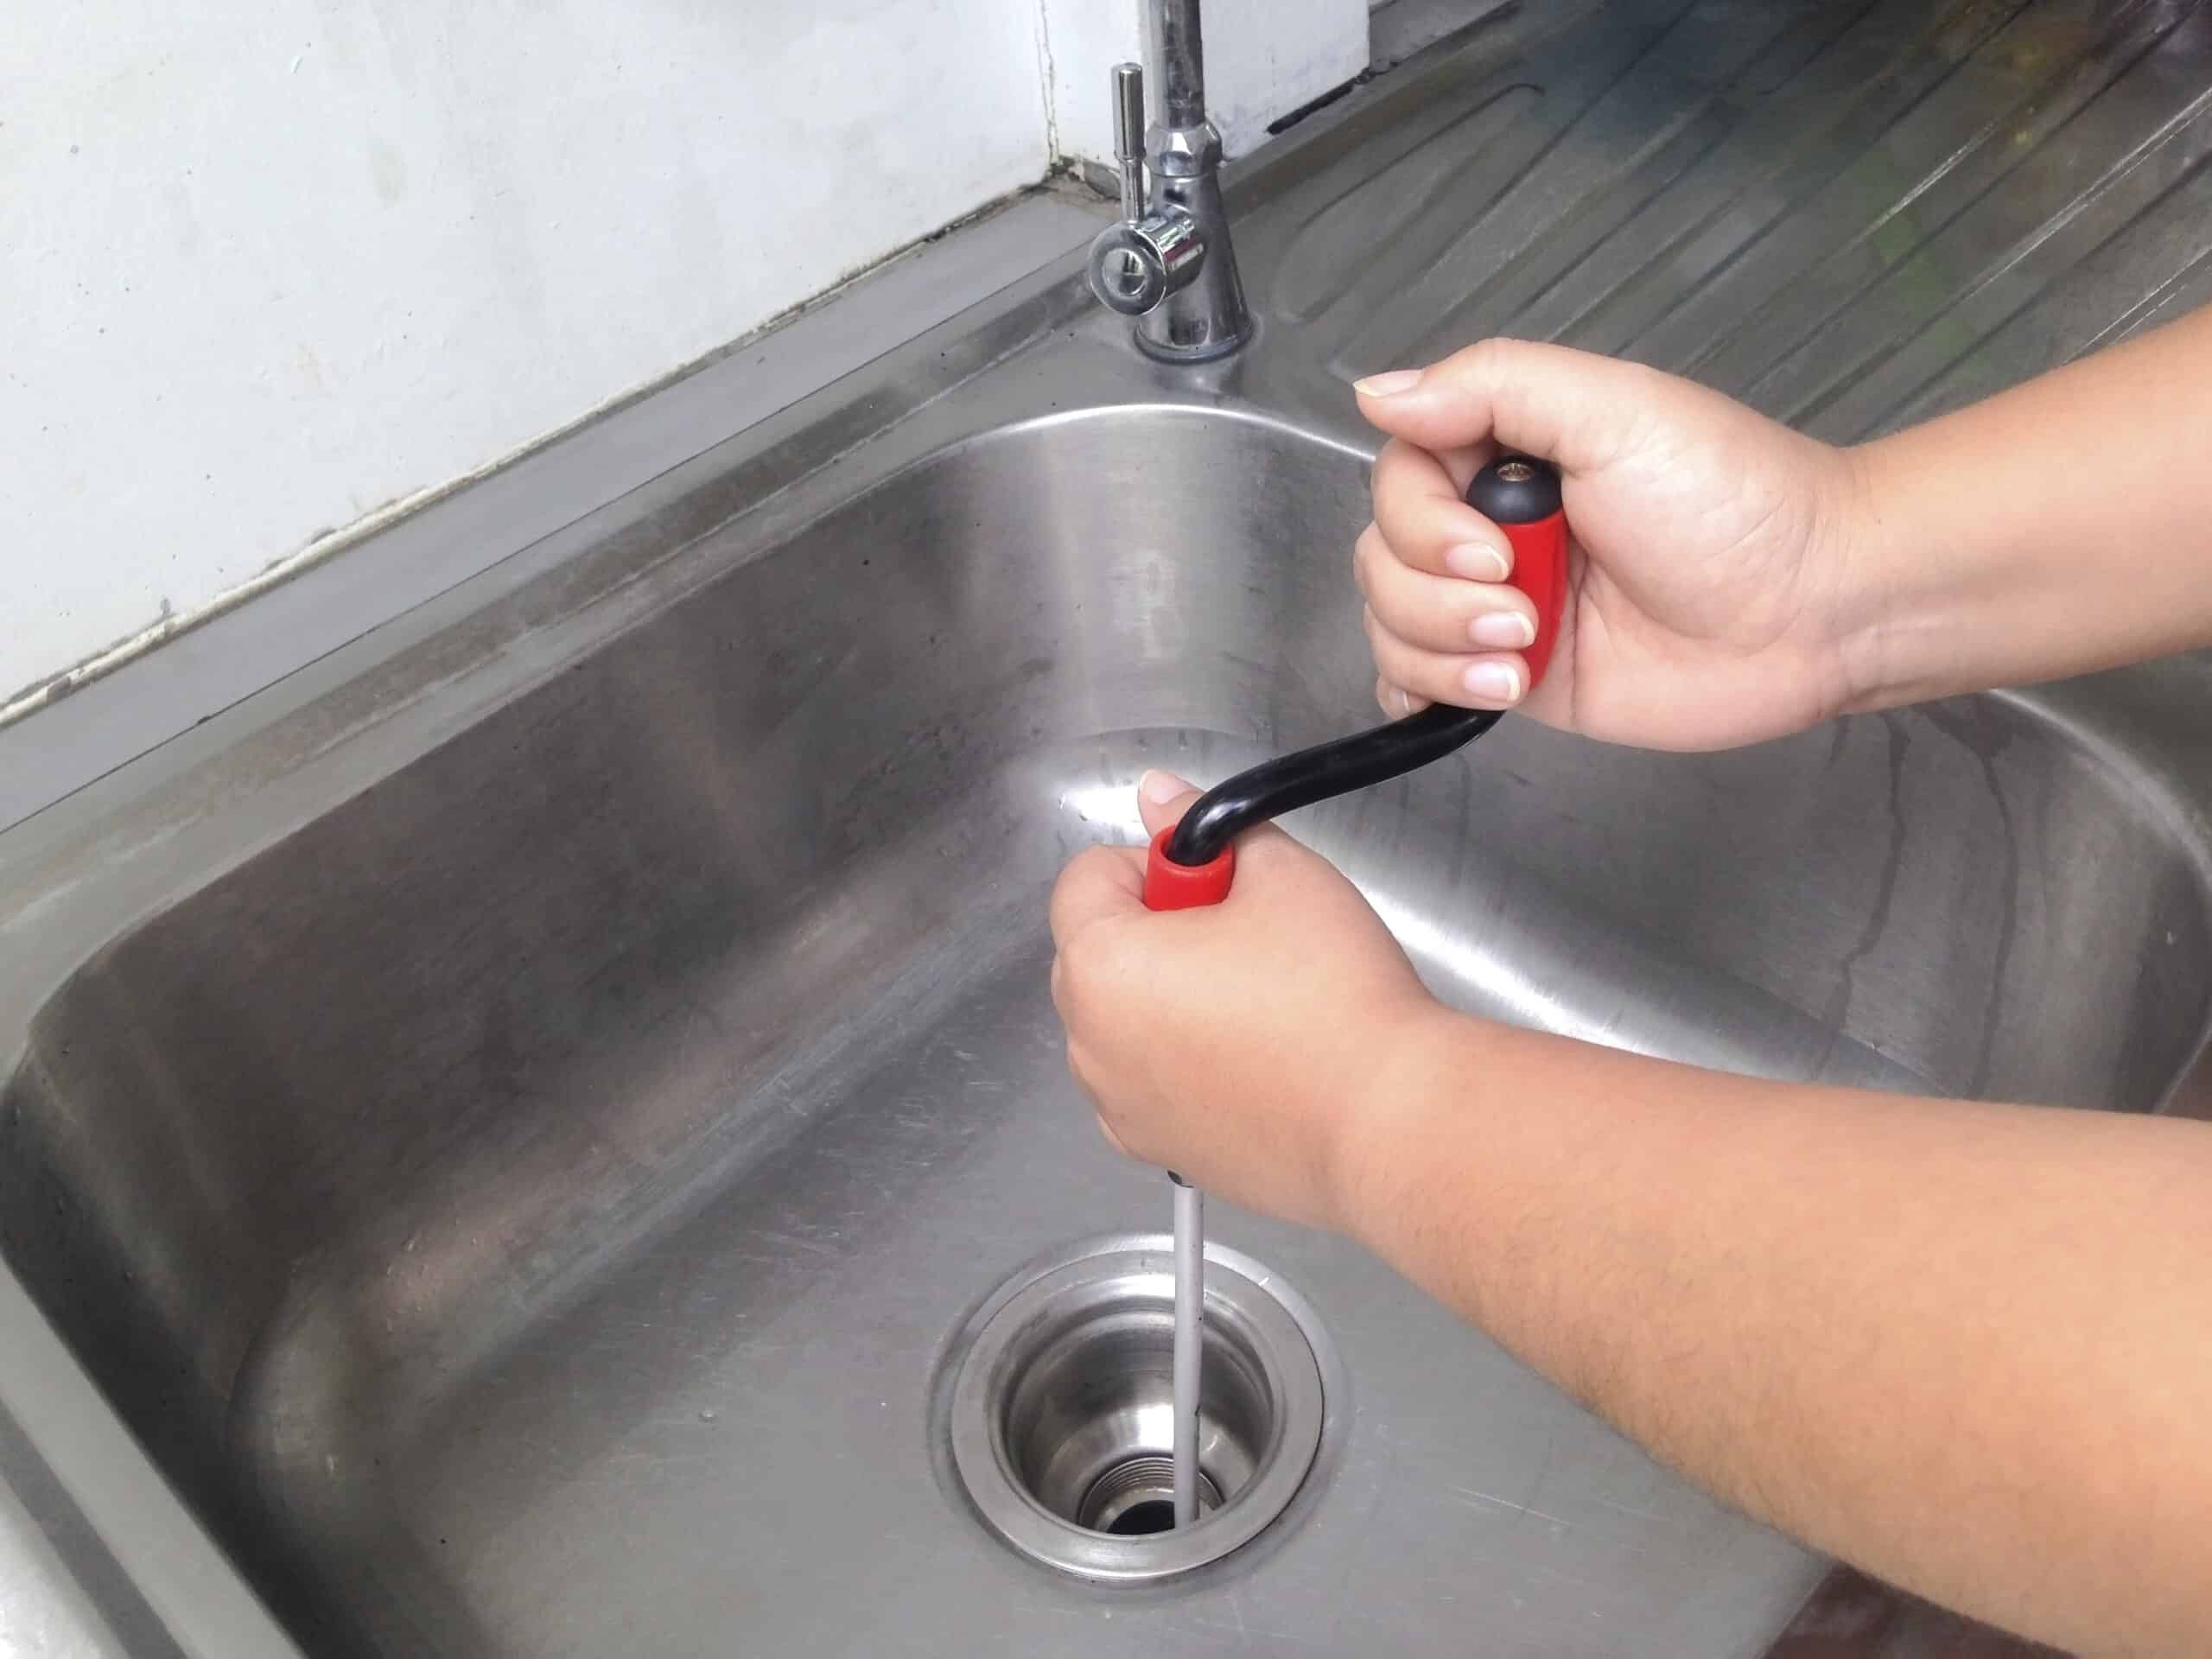 Common Drain Cleaning Mistakes to Avoid And When to Call a Plumber